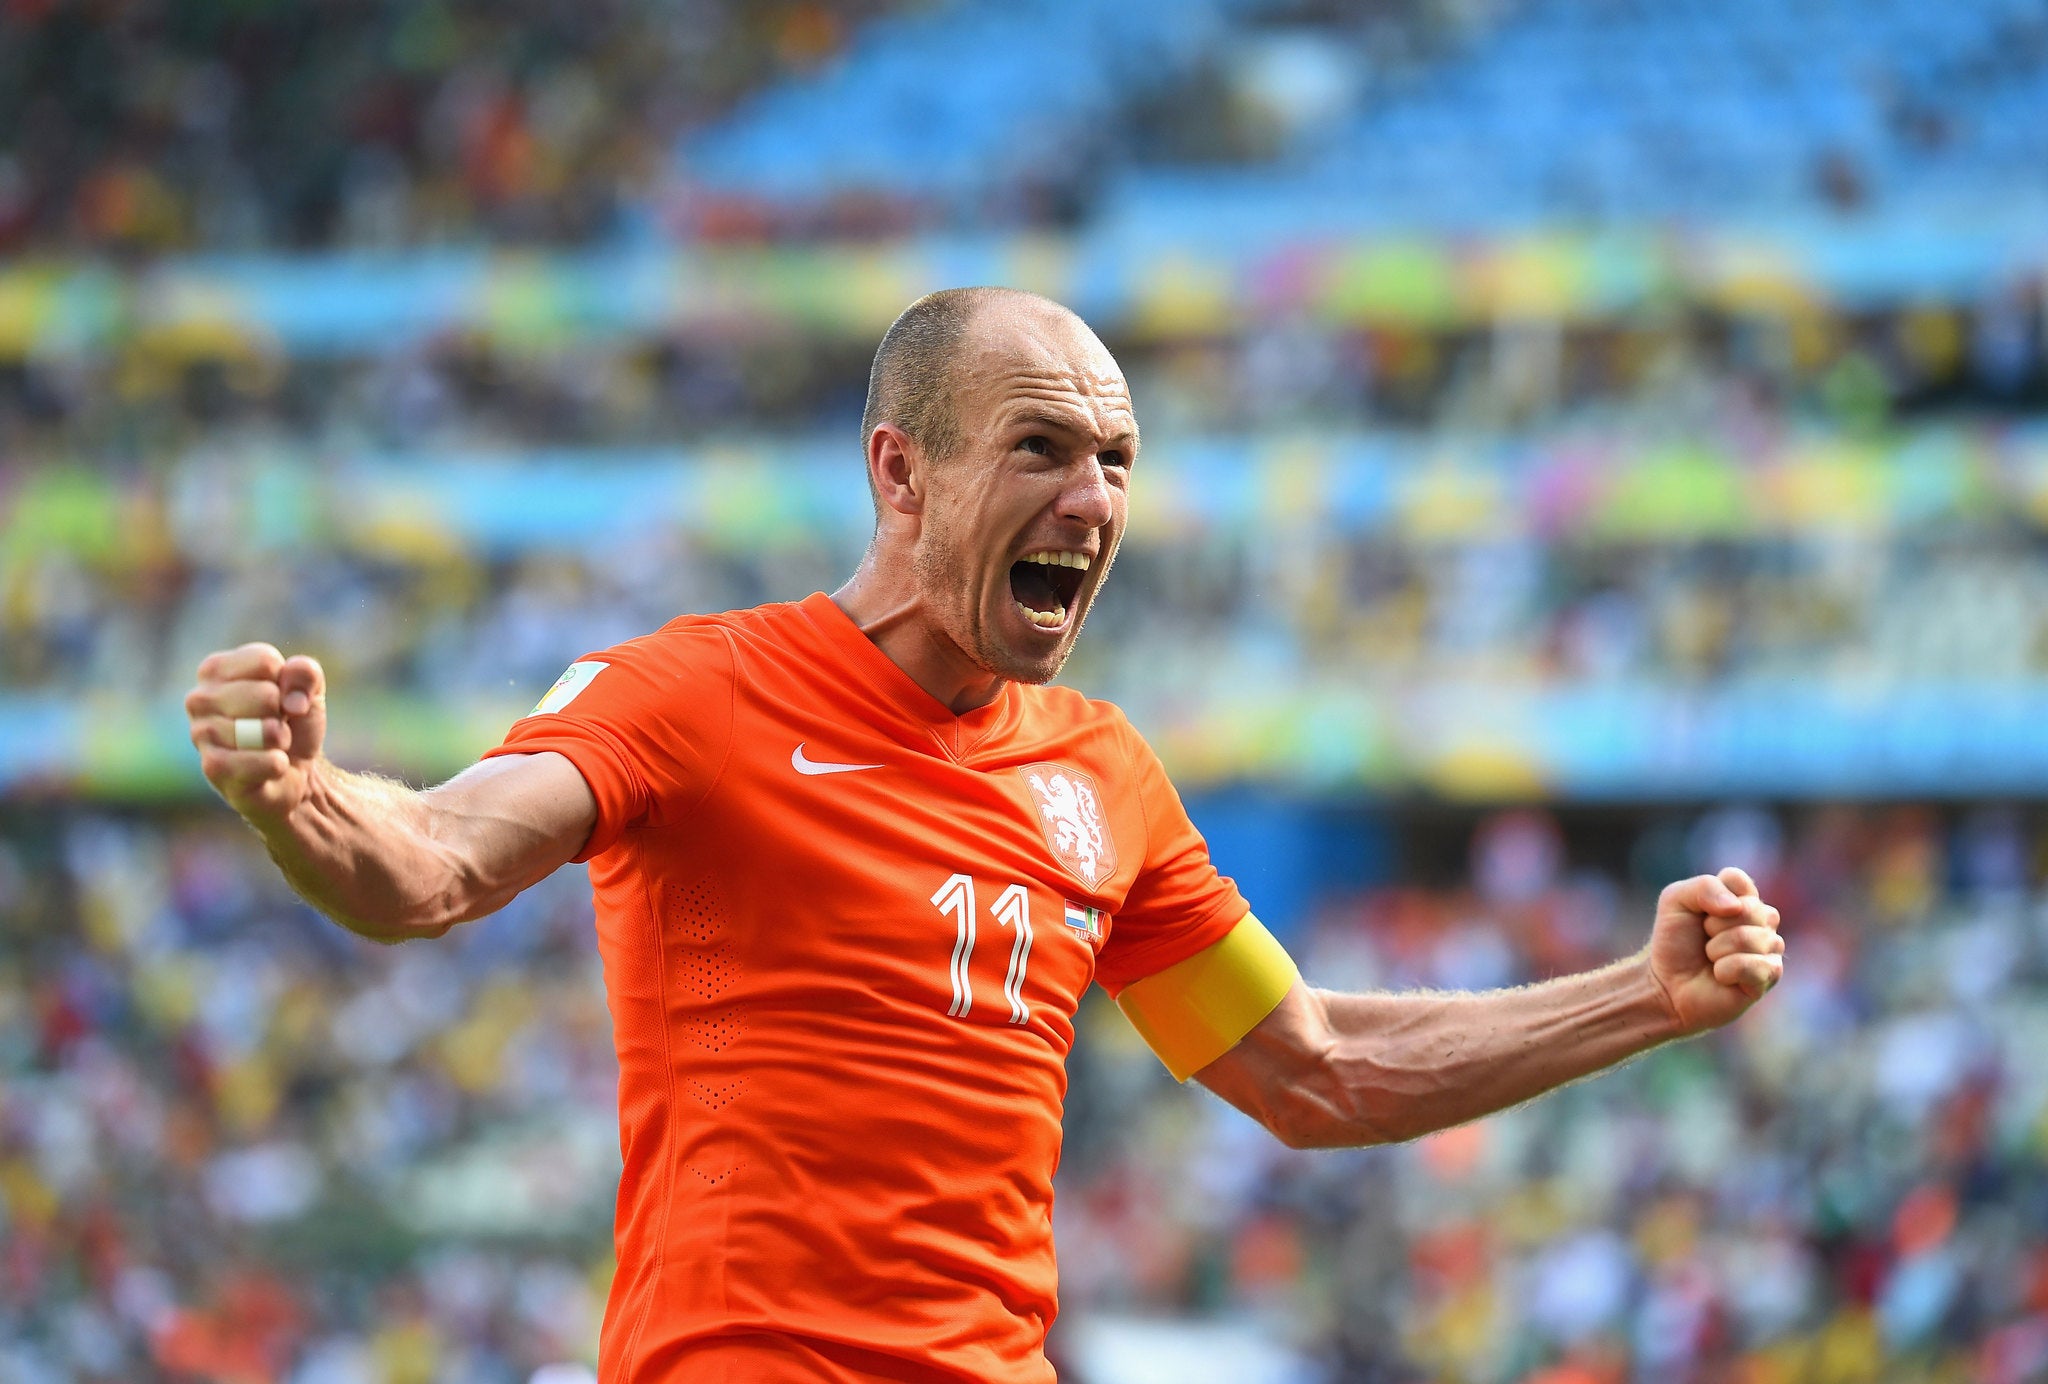 Arjen Robben was the star once again in the World Cup quarter-final clash with Costa Rica